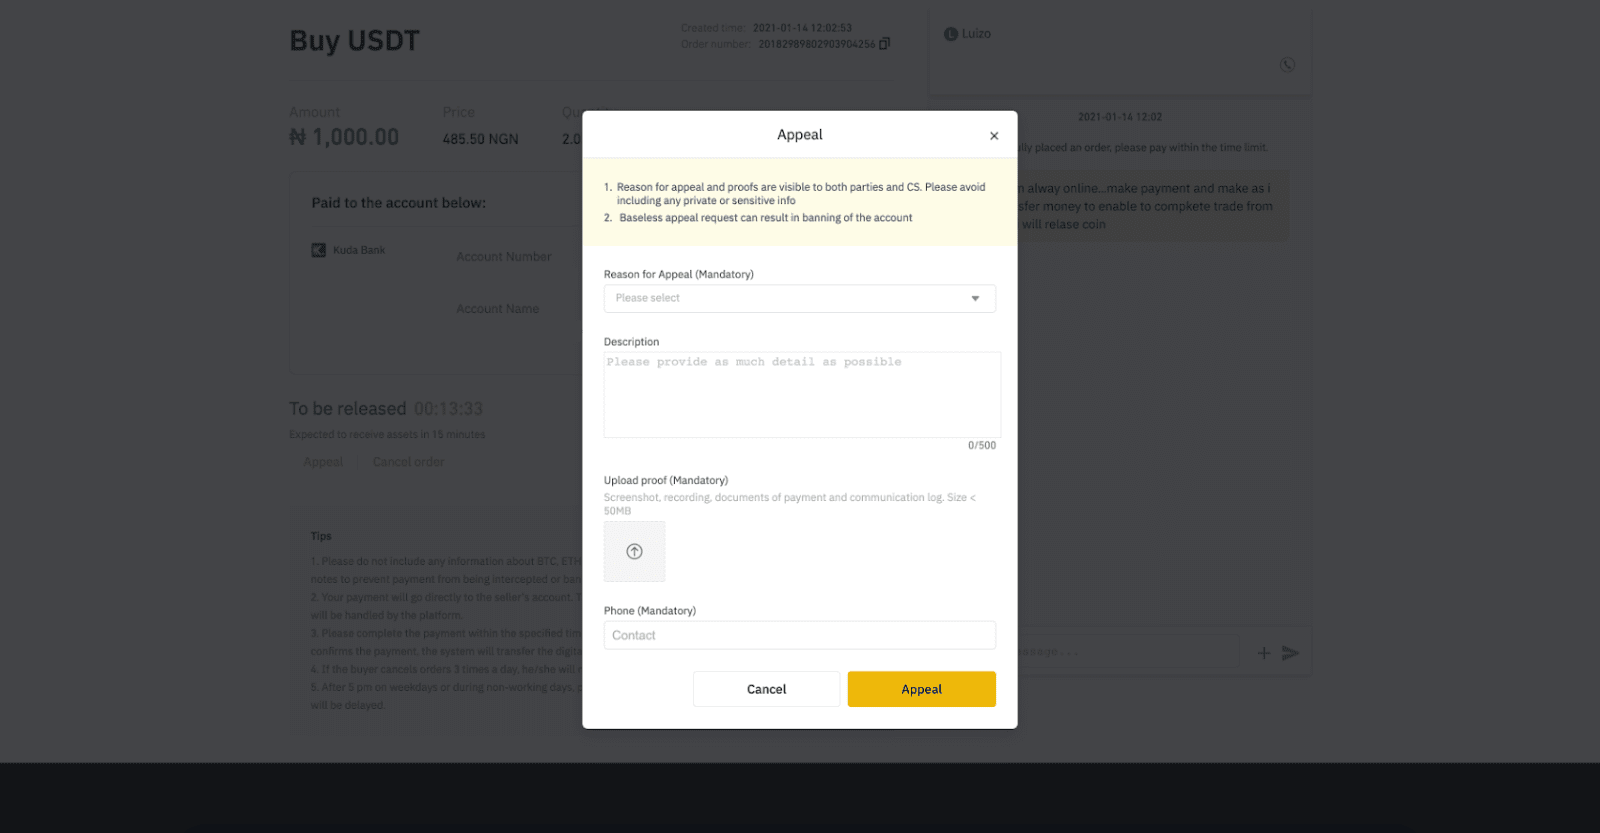 How to Deposit and Trade Crypto at Binance